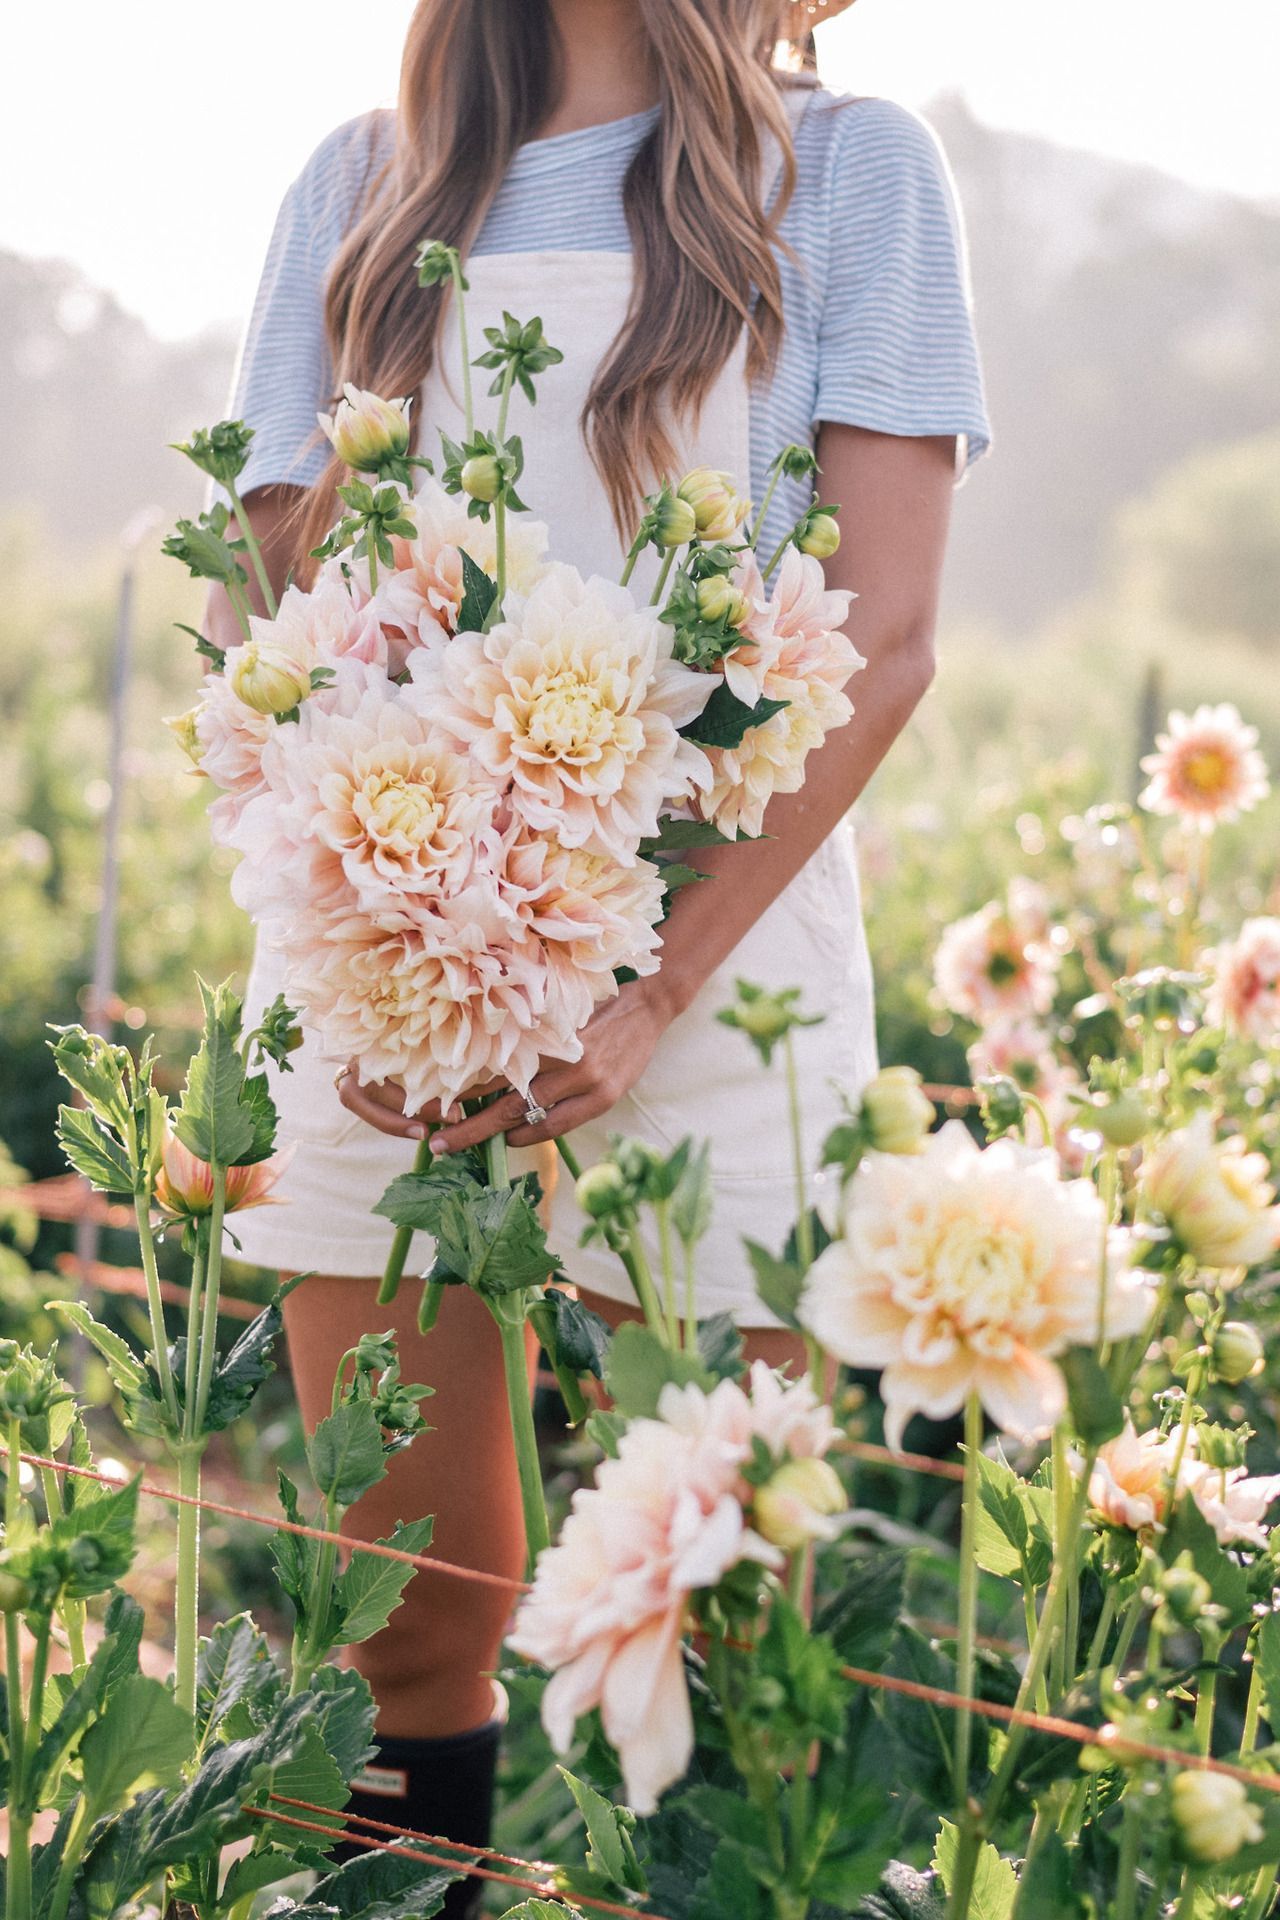 This Flower Farm Will Make You Want To Become A Flower Farmer - Gal Meets Glam -   18 girl planting Flowers ideas